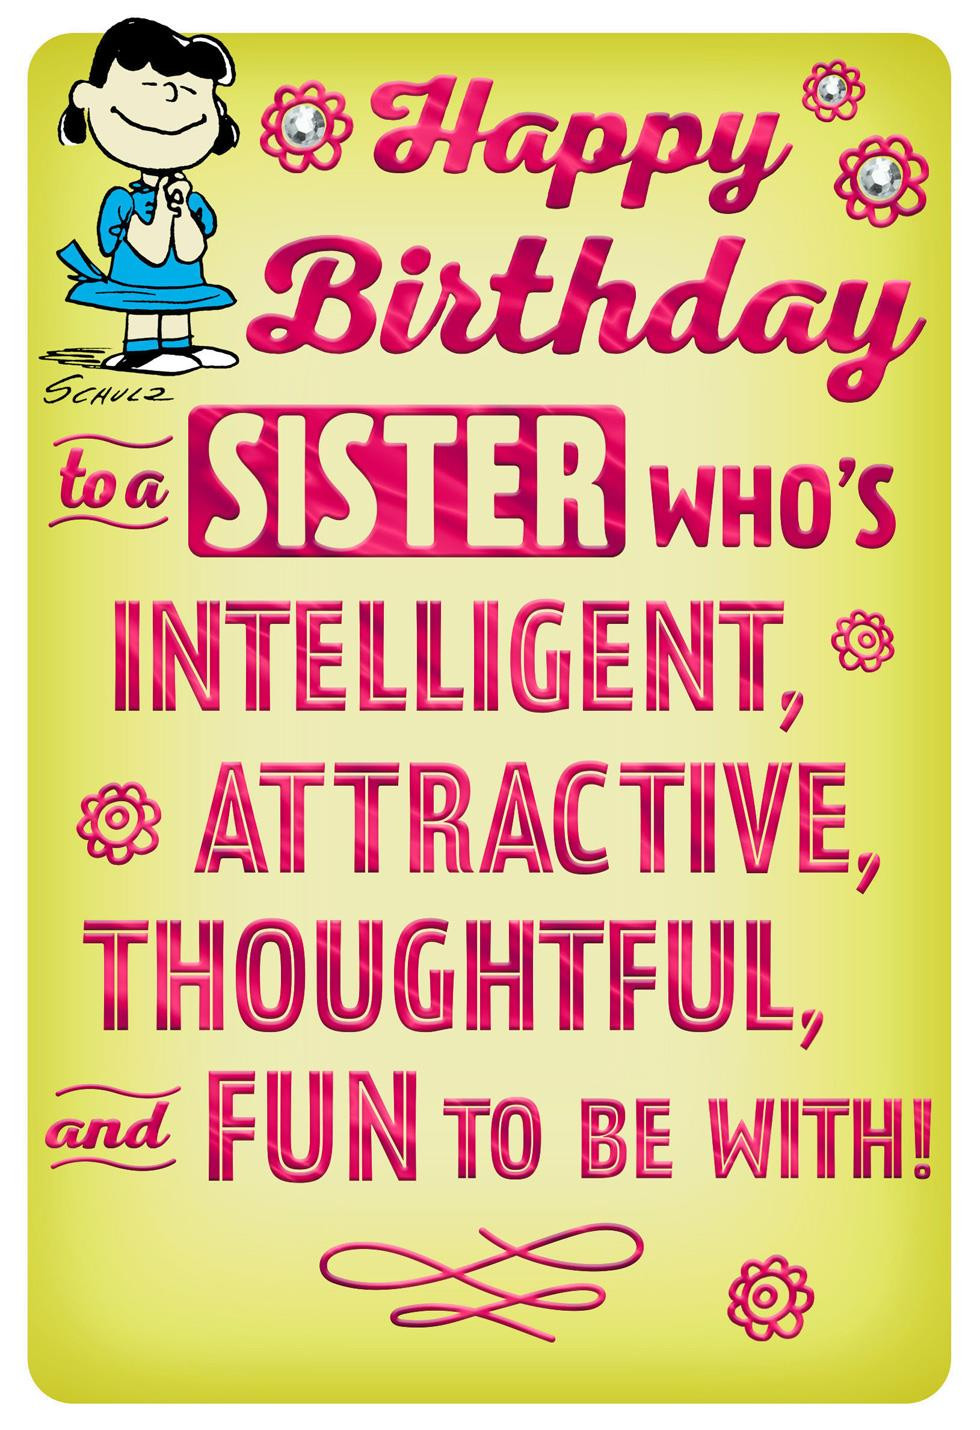 Birthday Cards For Sister Funny
 Peanuts Lucy Fun and Intelligent Sister Funny Birthday